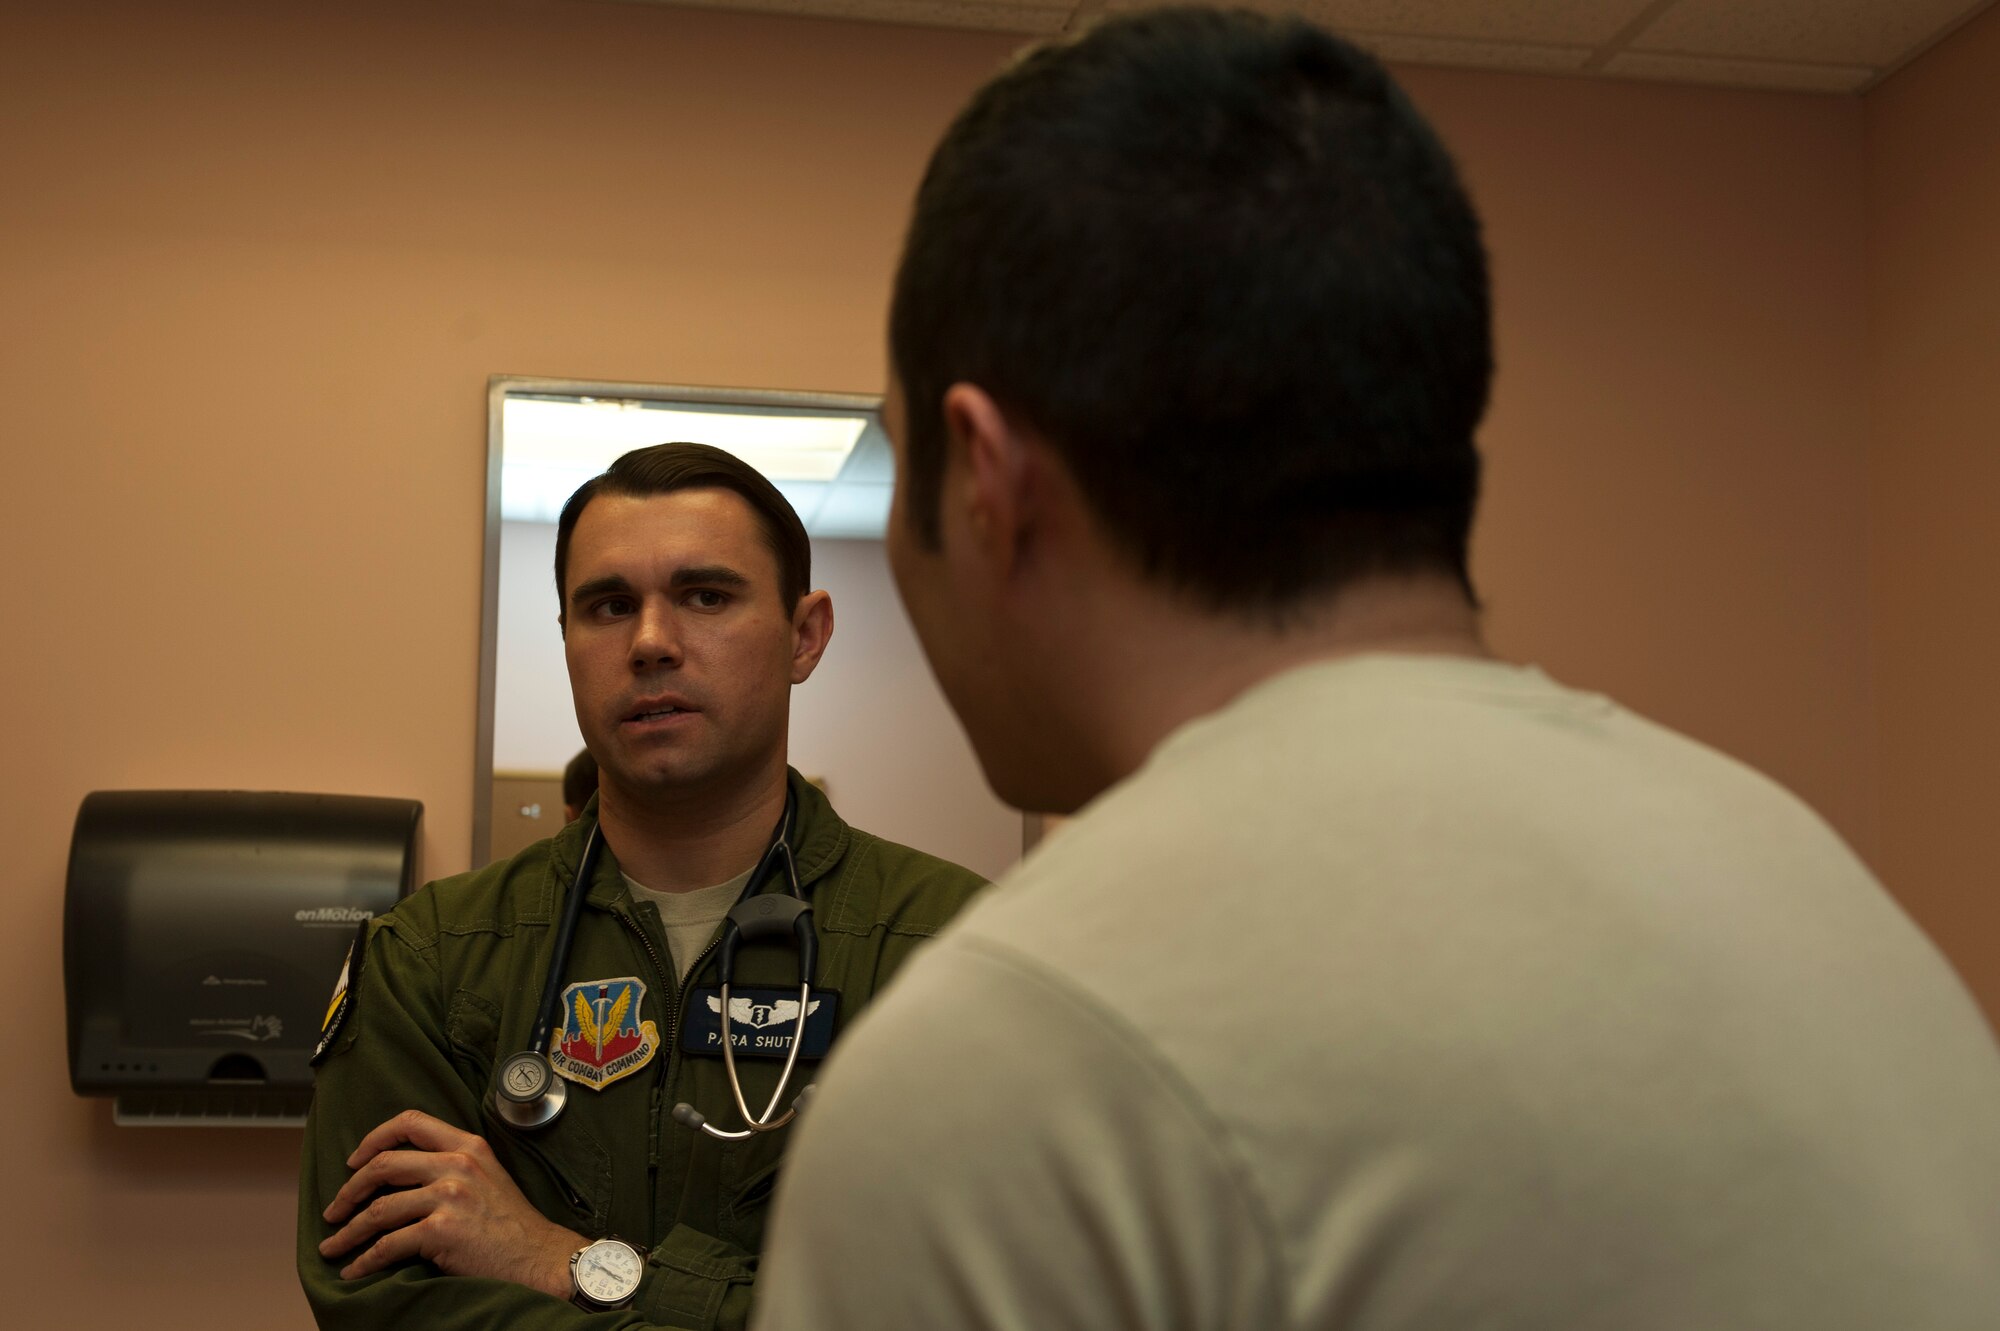 U.S. Air Force Capt. (Dr.) Thomas Shute, 42nd Attack Squadron flight surgeon, explains common hearing problems to Senior Airman Phou Johnson, 757th Aircraft Maintenance Squadron avionics technician, during a follow-up occupational health exam Jan. 10, 2014, at Nellis Air Force Base, Nev. Without the proper use of hearing protection the hazardous noise levels reached on the flight line can damage an Airman’s hearing. (U.S. Air Force photo/Airman 1st Class Timothy Young)